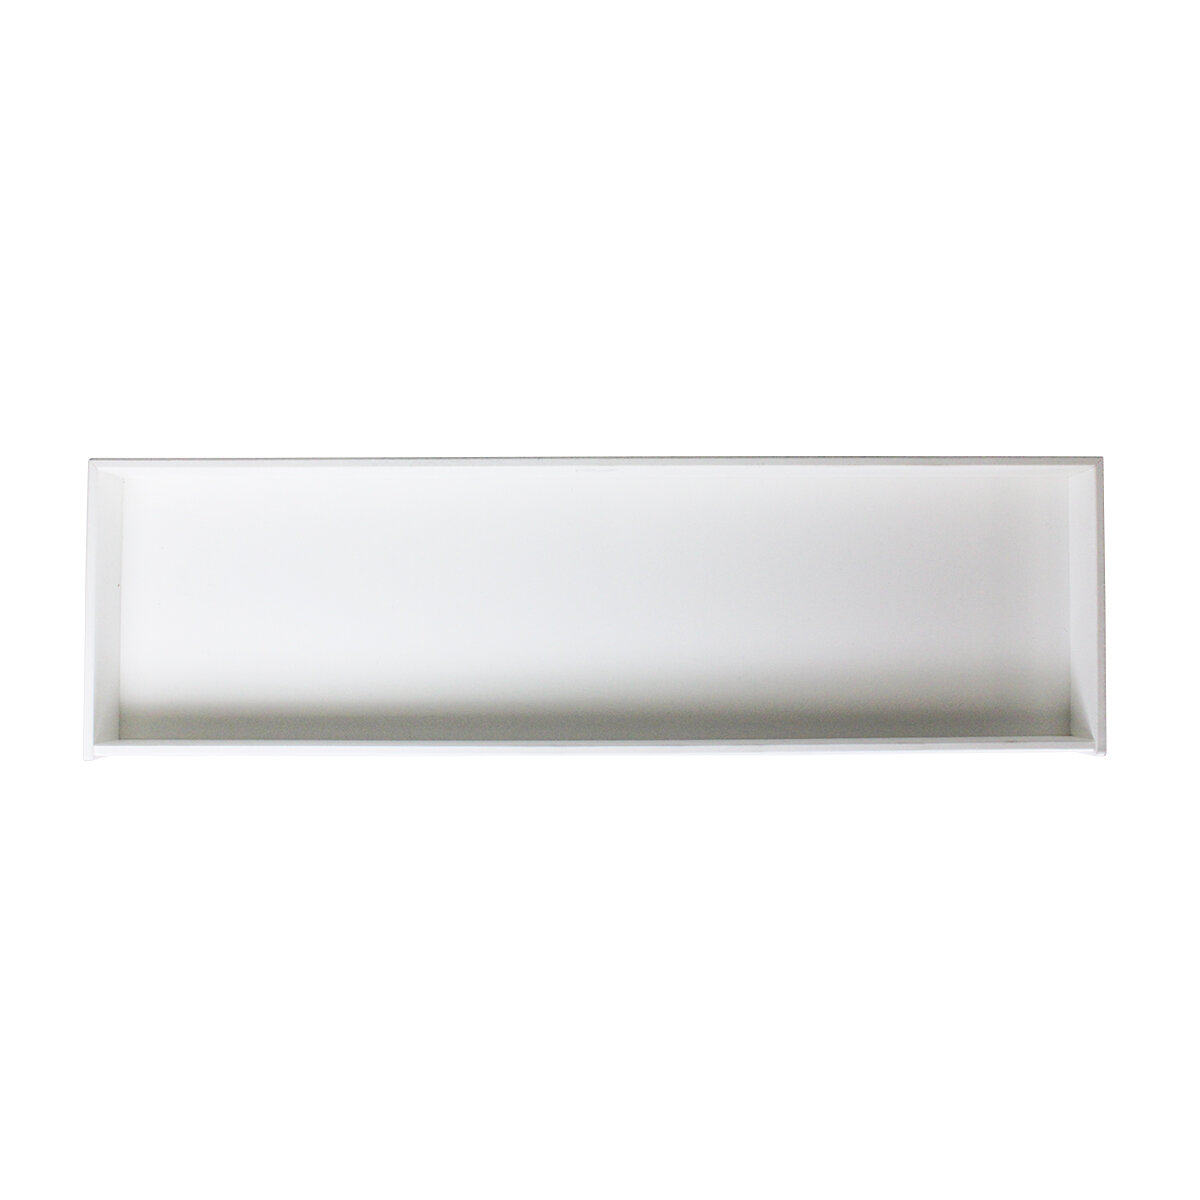 White 24 Width x 16 Height x 9 Depth TrippNT 50178 PVC Straight Double Safety Shelves 